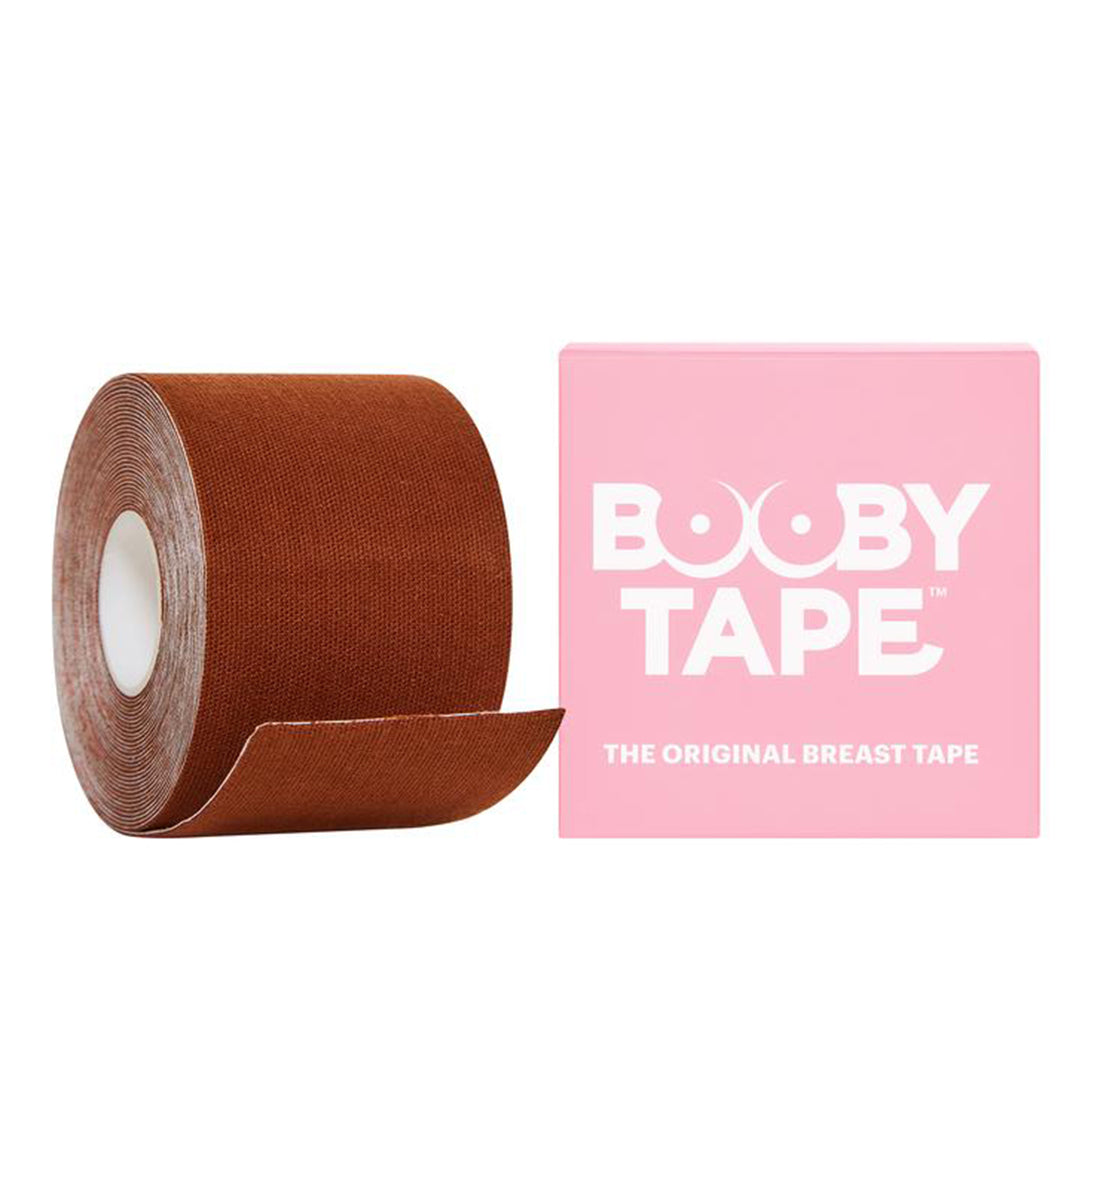 BOOBY TAPE The Original Breast Tape,5 m,Brown - Brown,One Size